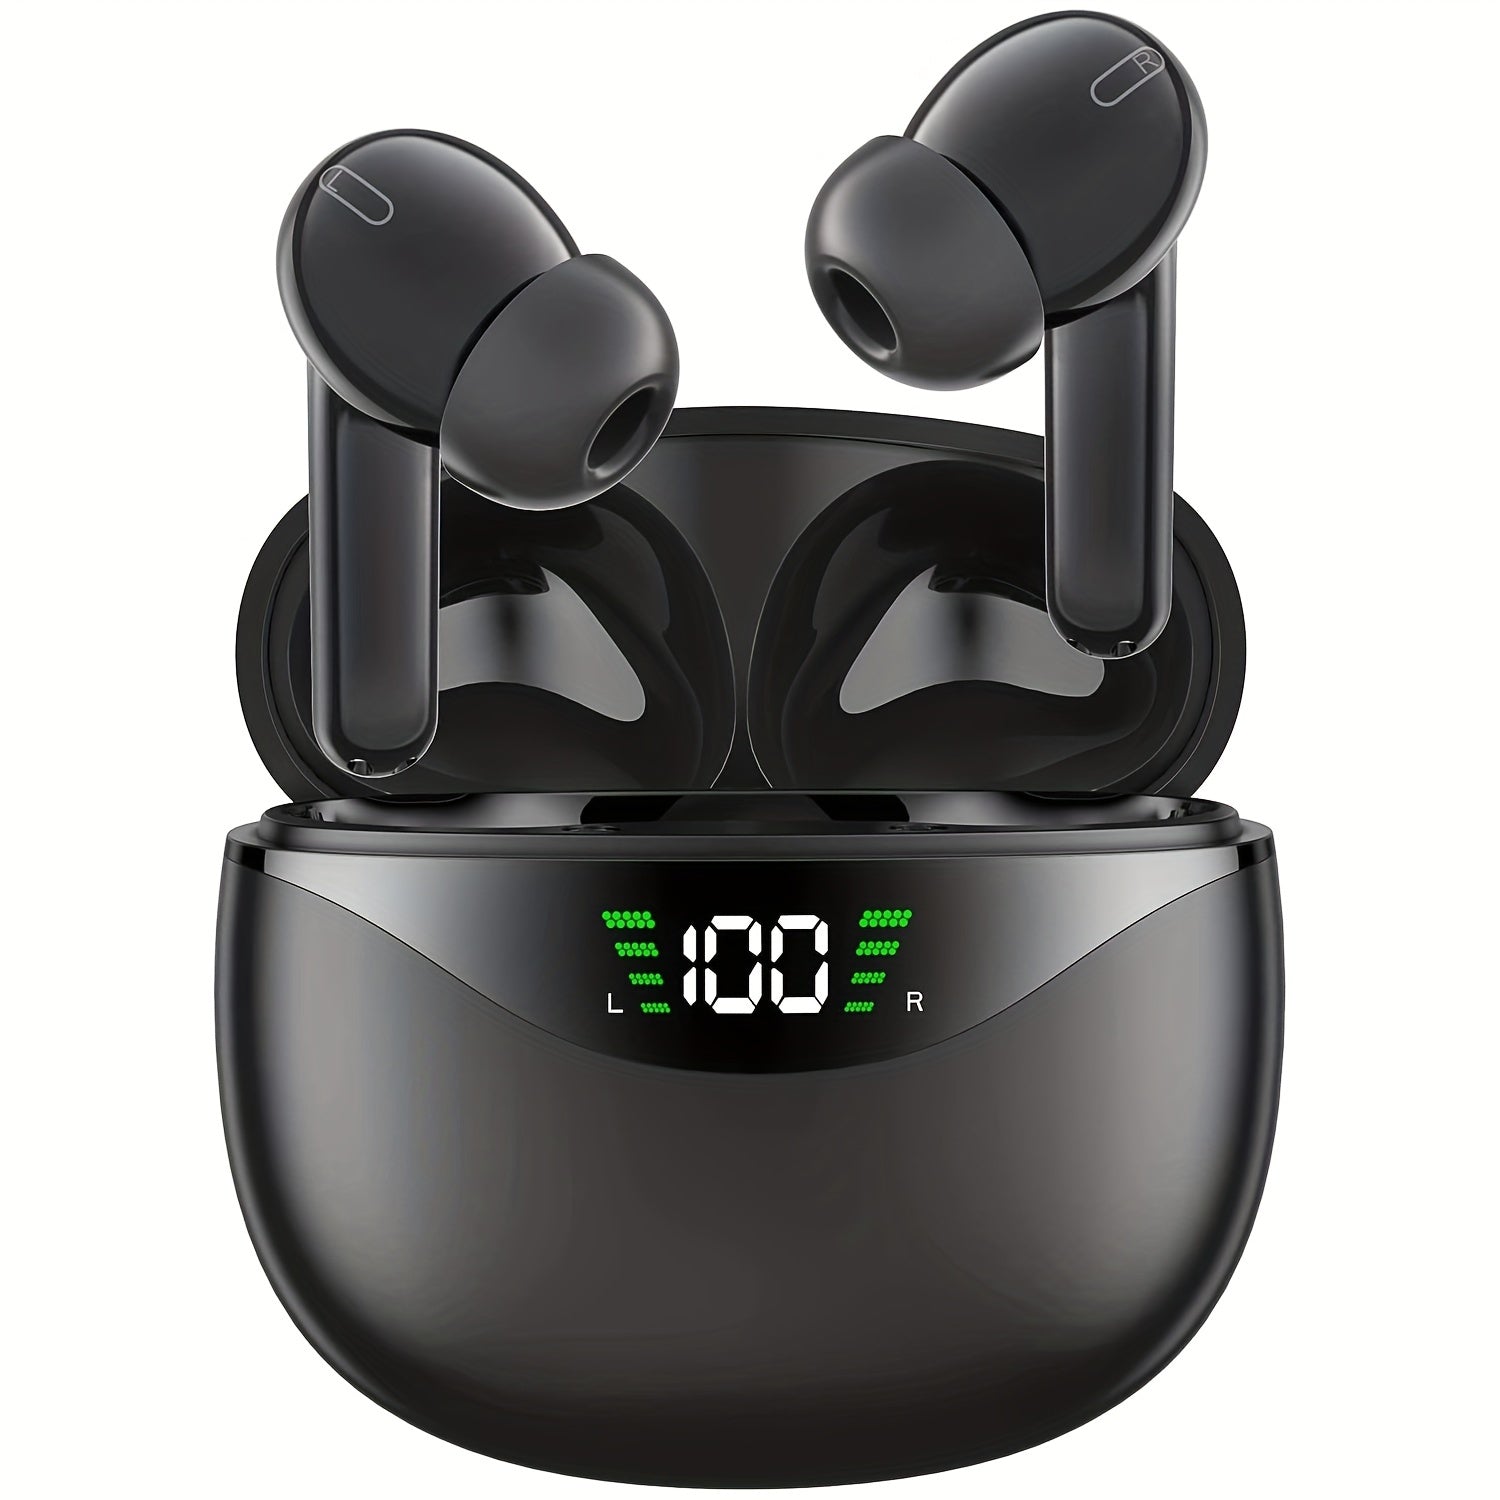 Wireless Earbuds, V5.1  Headphones 30+H Playtime With LED Digital Display Charging Case, IPX7 Waterproof Earphones With Mic For Sports Workout Compatible For IPhone/Android/Pods (Black)